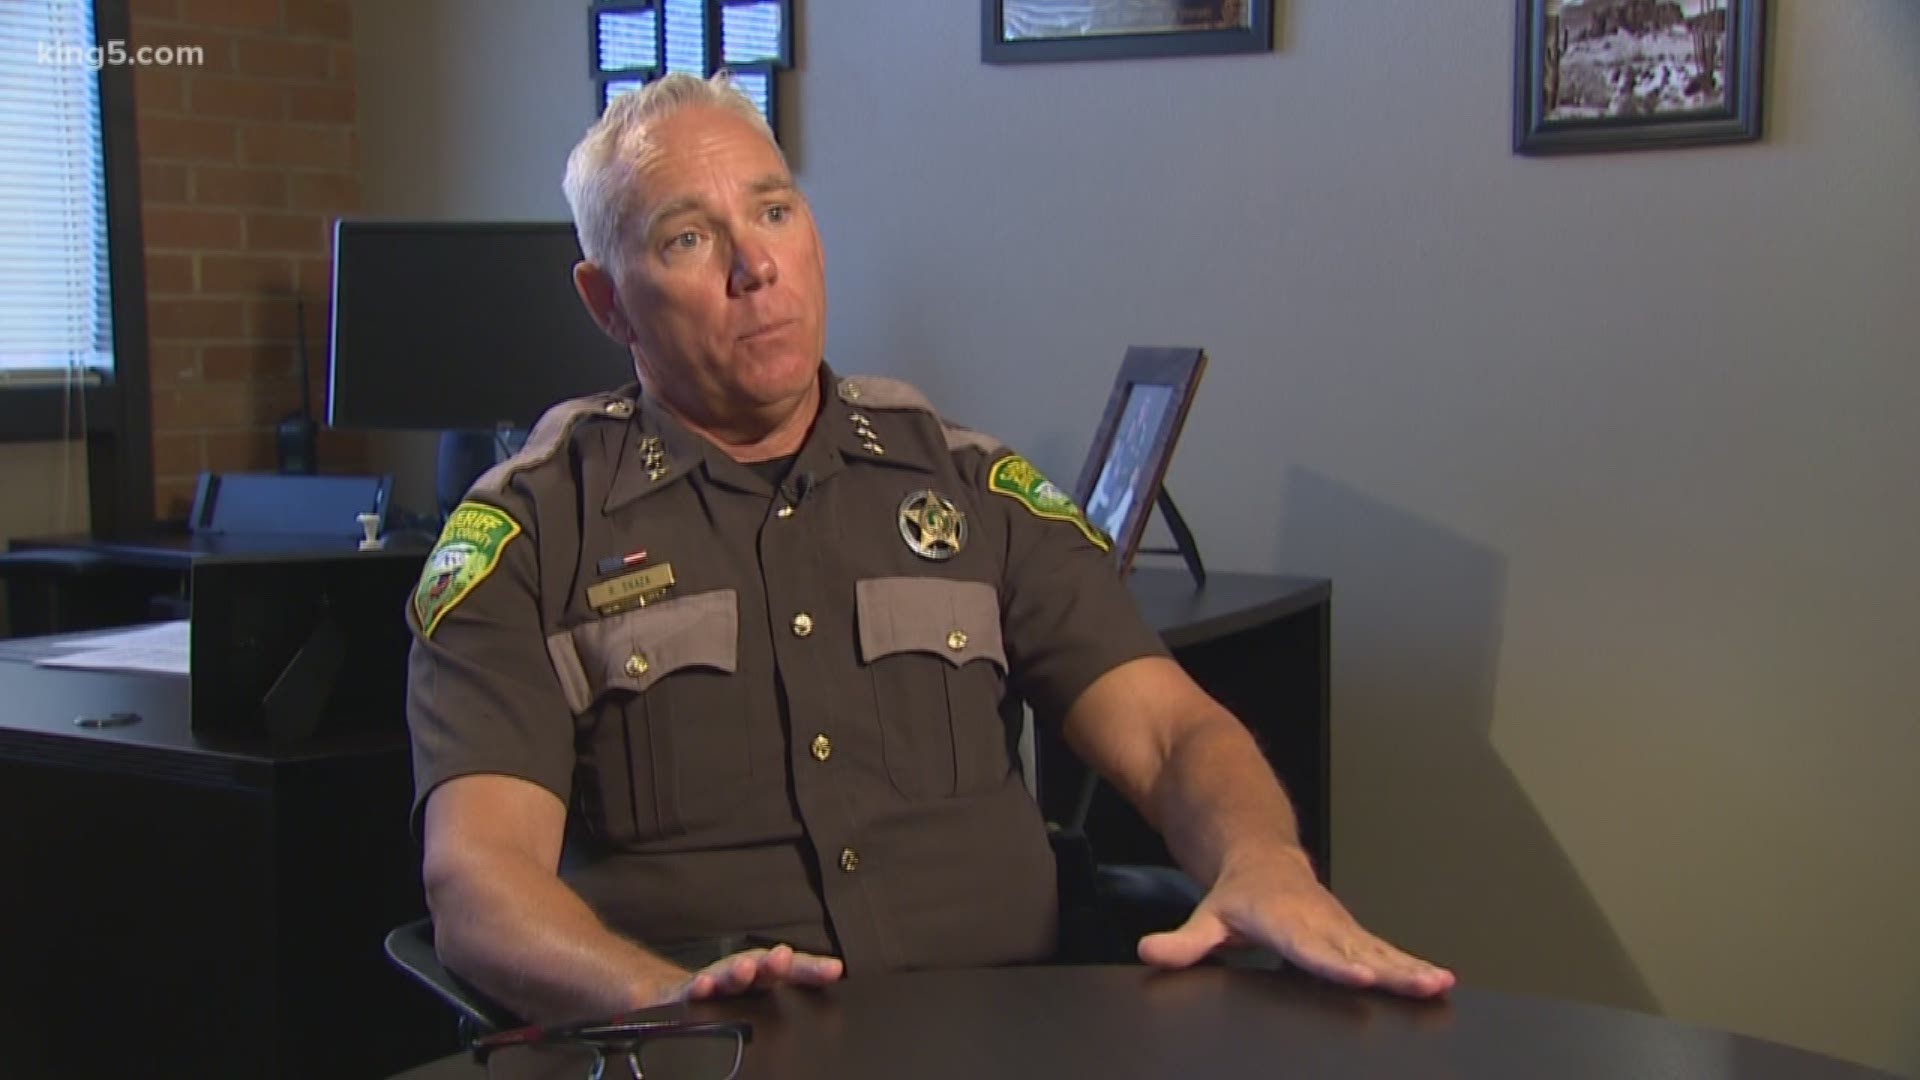 The Lewis County Sheriff doesn't agree with I-1639, one of the toughest gun laws in the country, but Sheriff Snaza says he will enforce it. KING 5's Drew Mikkelsen reports.